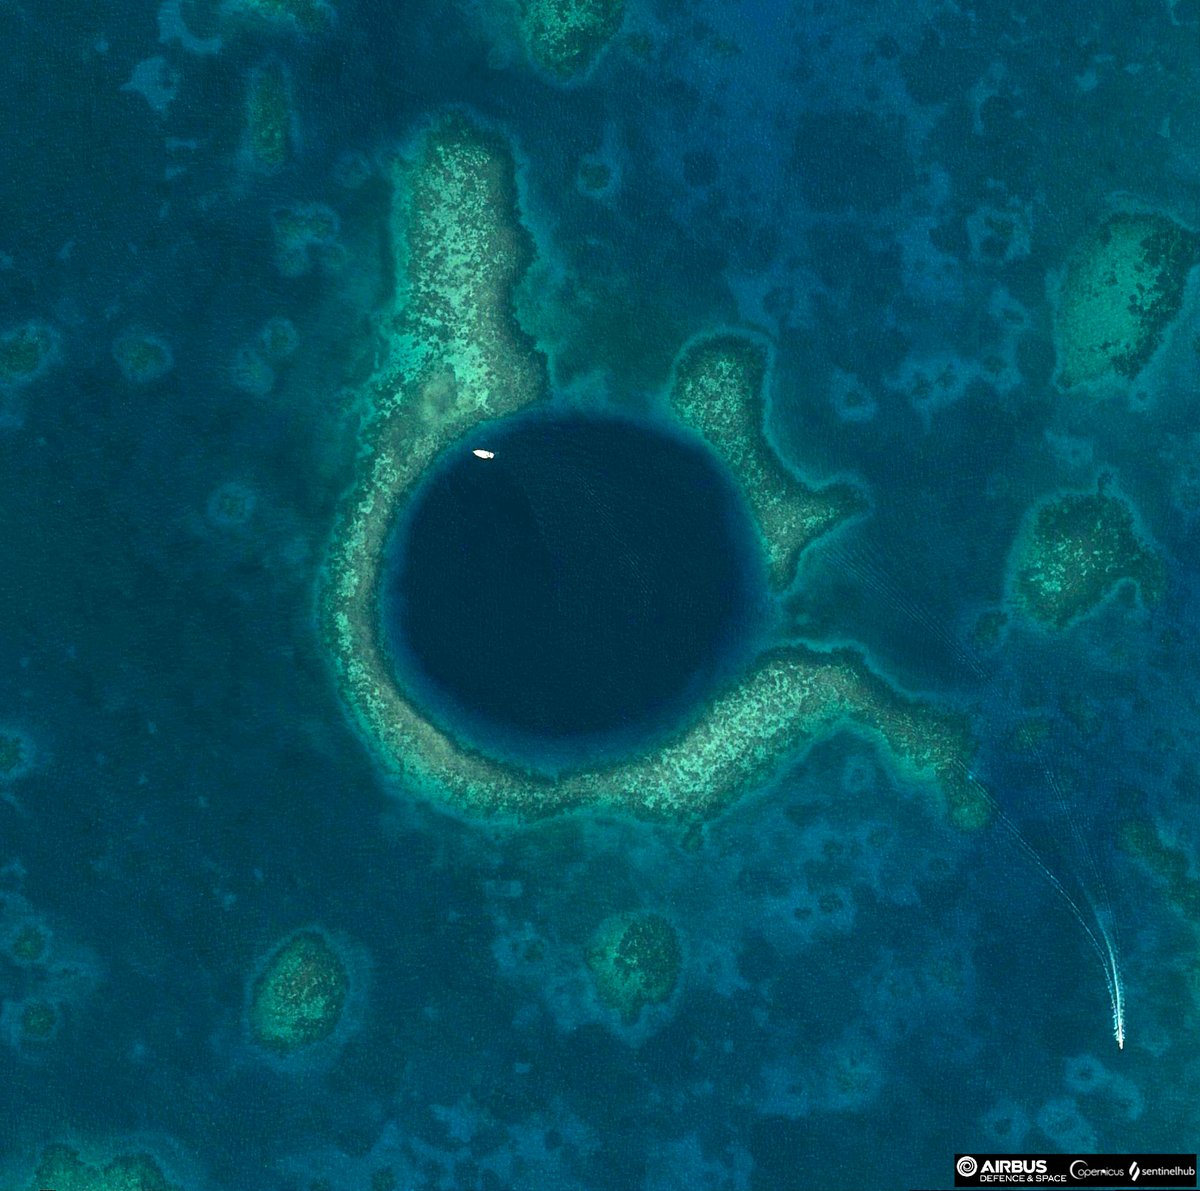 Great Blue Hole - a giant ~320 meters wide sinkhole just off the coast of #Belize. 
Image captured by @CNES/@AirbusSpace #Pleiades satellite in May 2021. Data processed in @sentinel_hub 

Open 🖼️ in new tab to see 50cm/pix resolution 😉🔎

#SouthAmerica #VHR